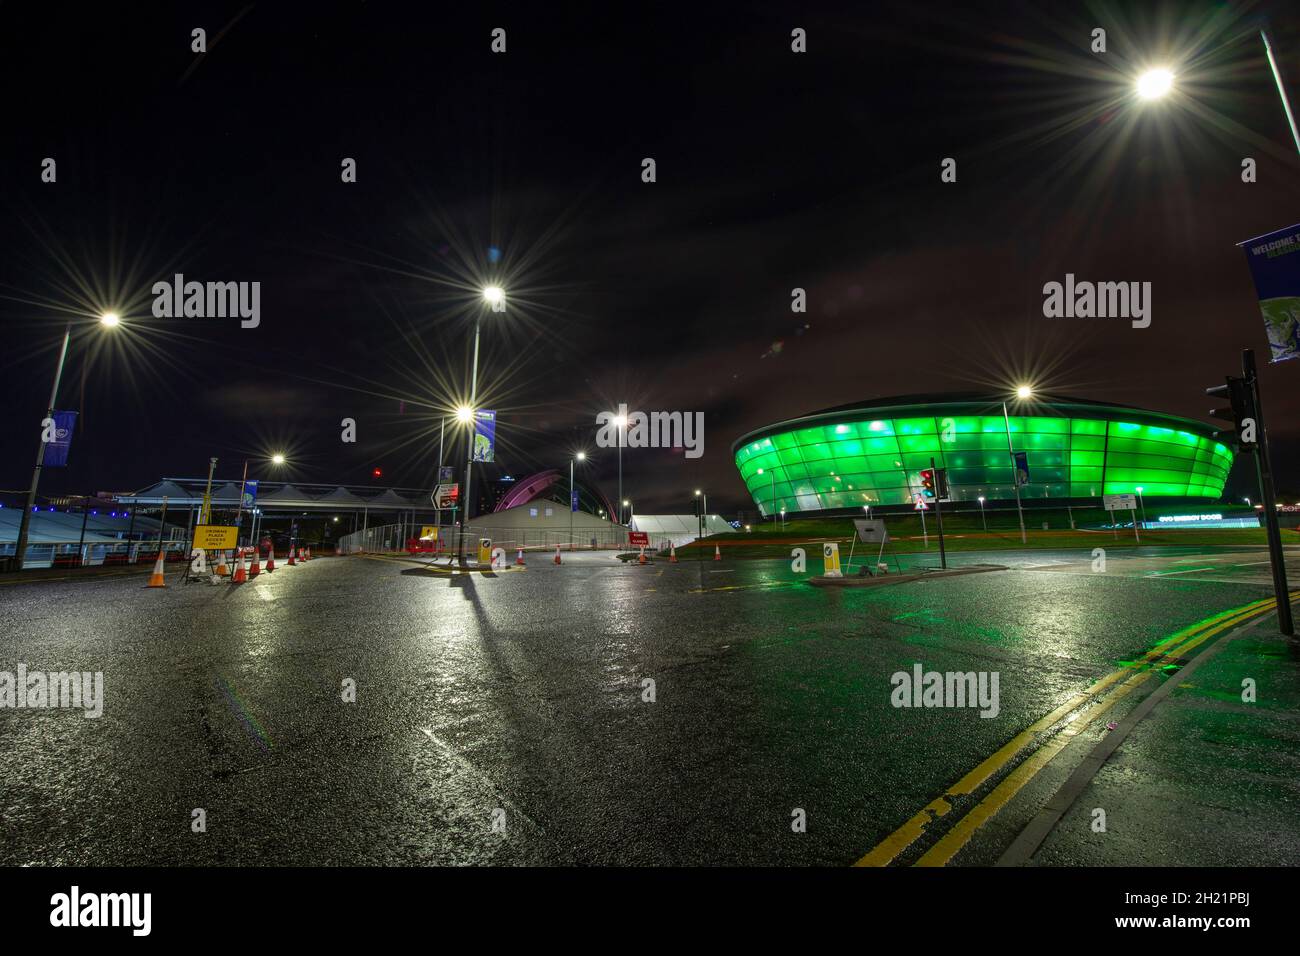 Glasgow, Scotland, UK. 19th Oct, 2021. PICTURED: Night views of the COP26 site and venue showing temporary structures half built on the grounds of the Scottish Event Campus (SEC) Previously known as Scottish Exhibition and Conference Centre (SECC) with the front car park outside of the newly named The OVO Hydro (formerly SSE Hydro) with new transfers over the walkway which says “People Make Glasgow” and night workers continue making preparations. Credit: Colin Fisher/Alamy Live News Stock Photo